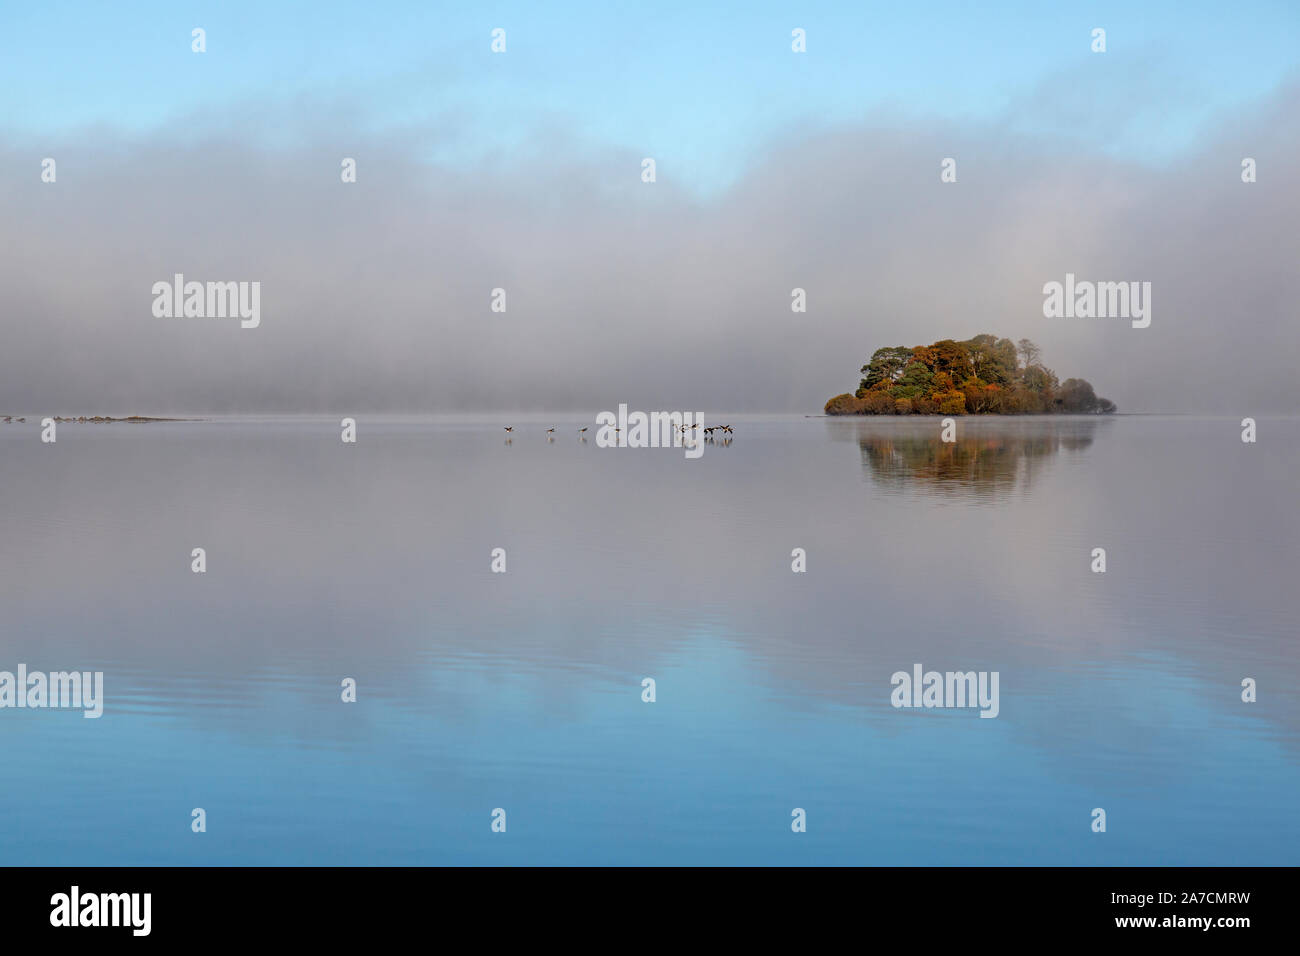 Early morning Derwent Water in the Lake District national park in England.  Mist on the lake, and a flock of geese flying low past a small island. Stock Photo